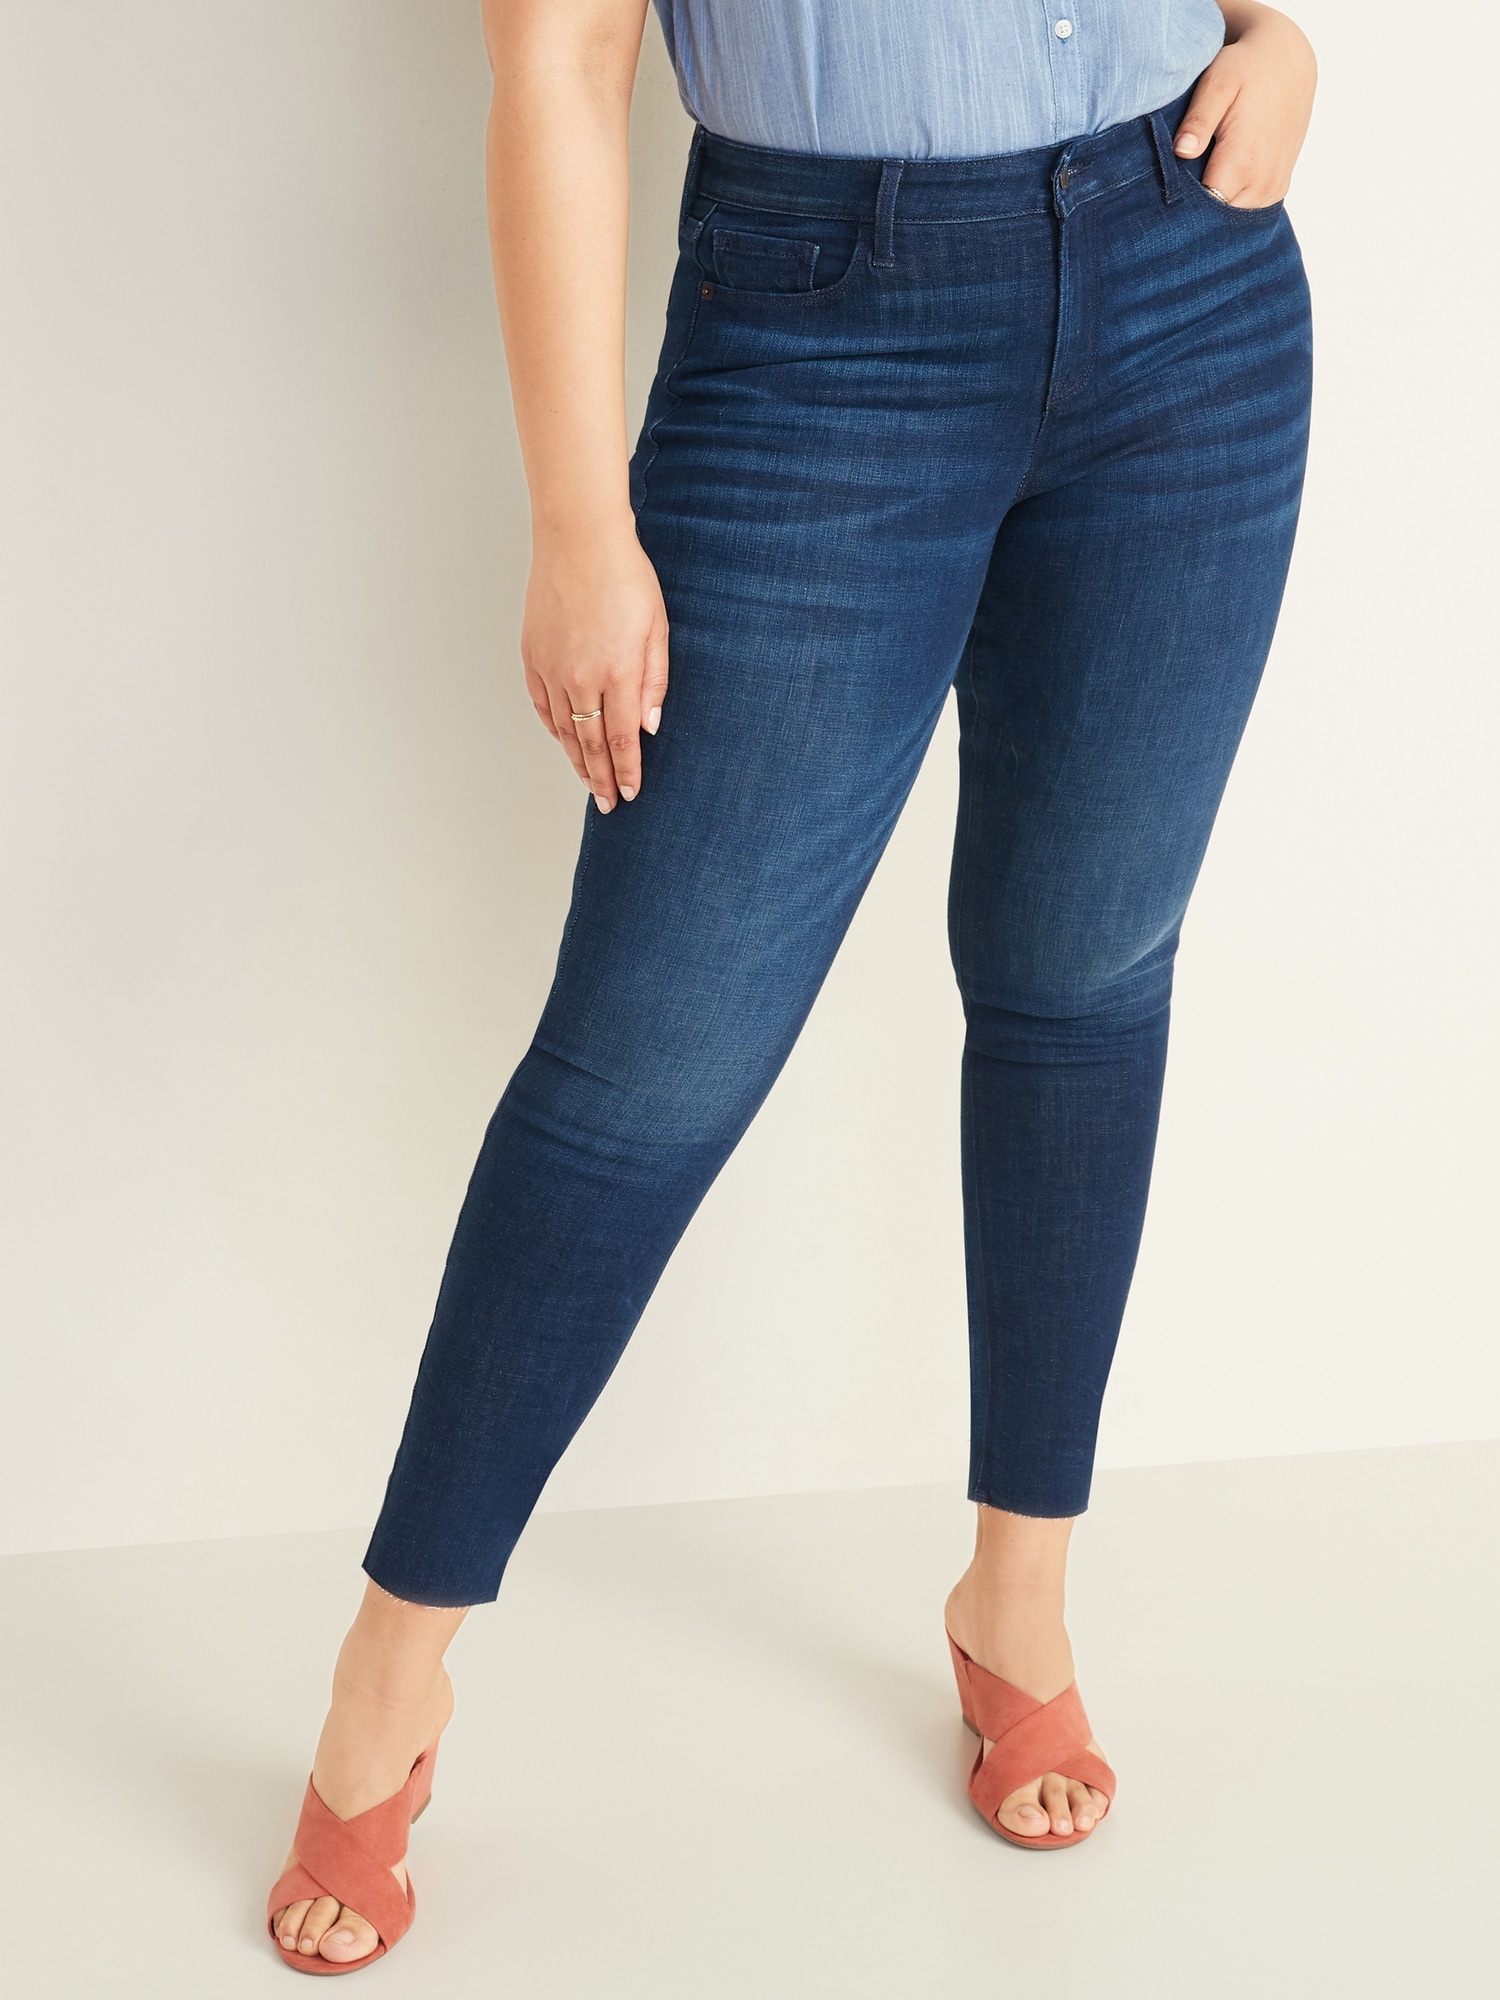 skinny frayed ankle jeans